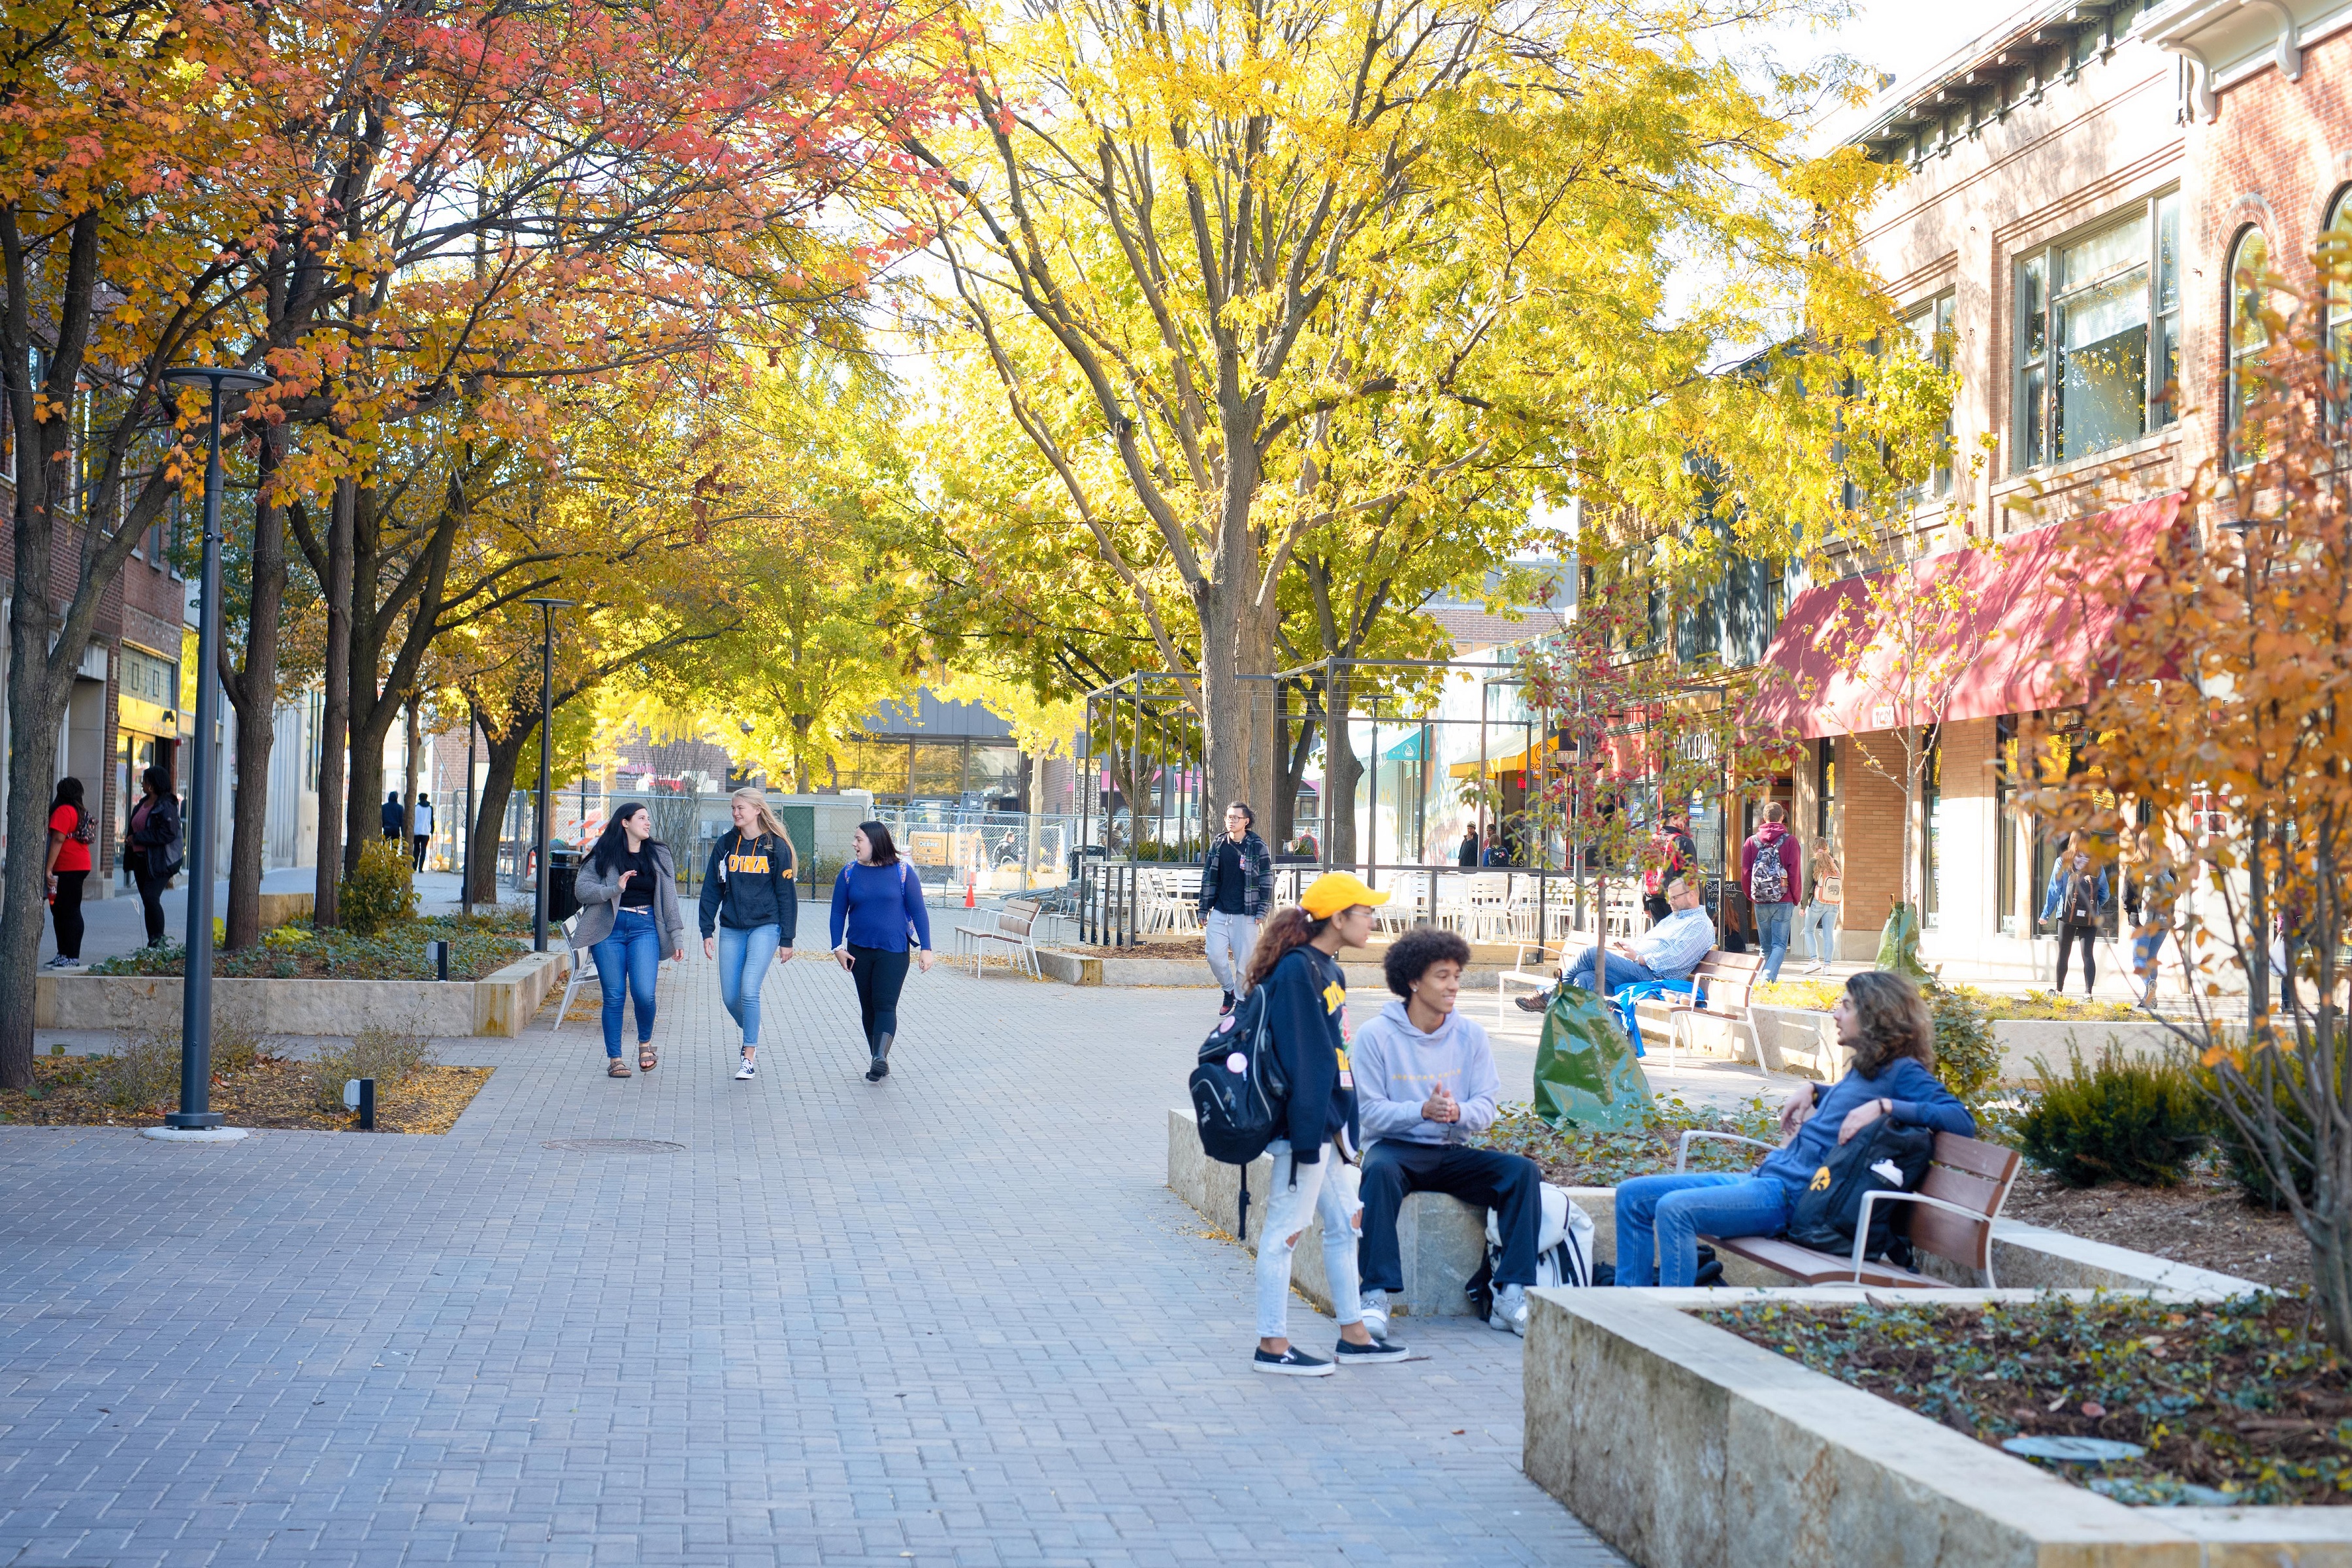 Downtown Iowa City in the fall